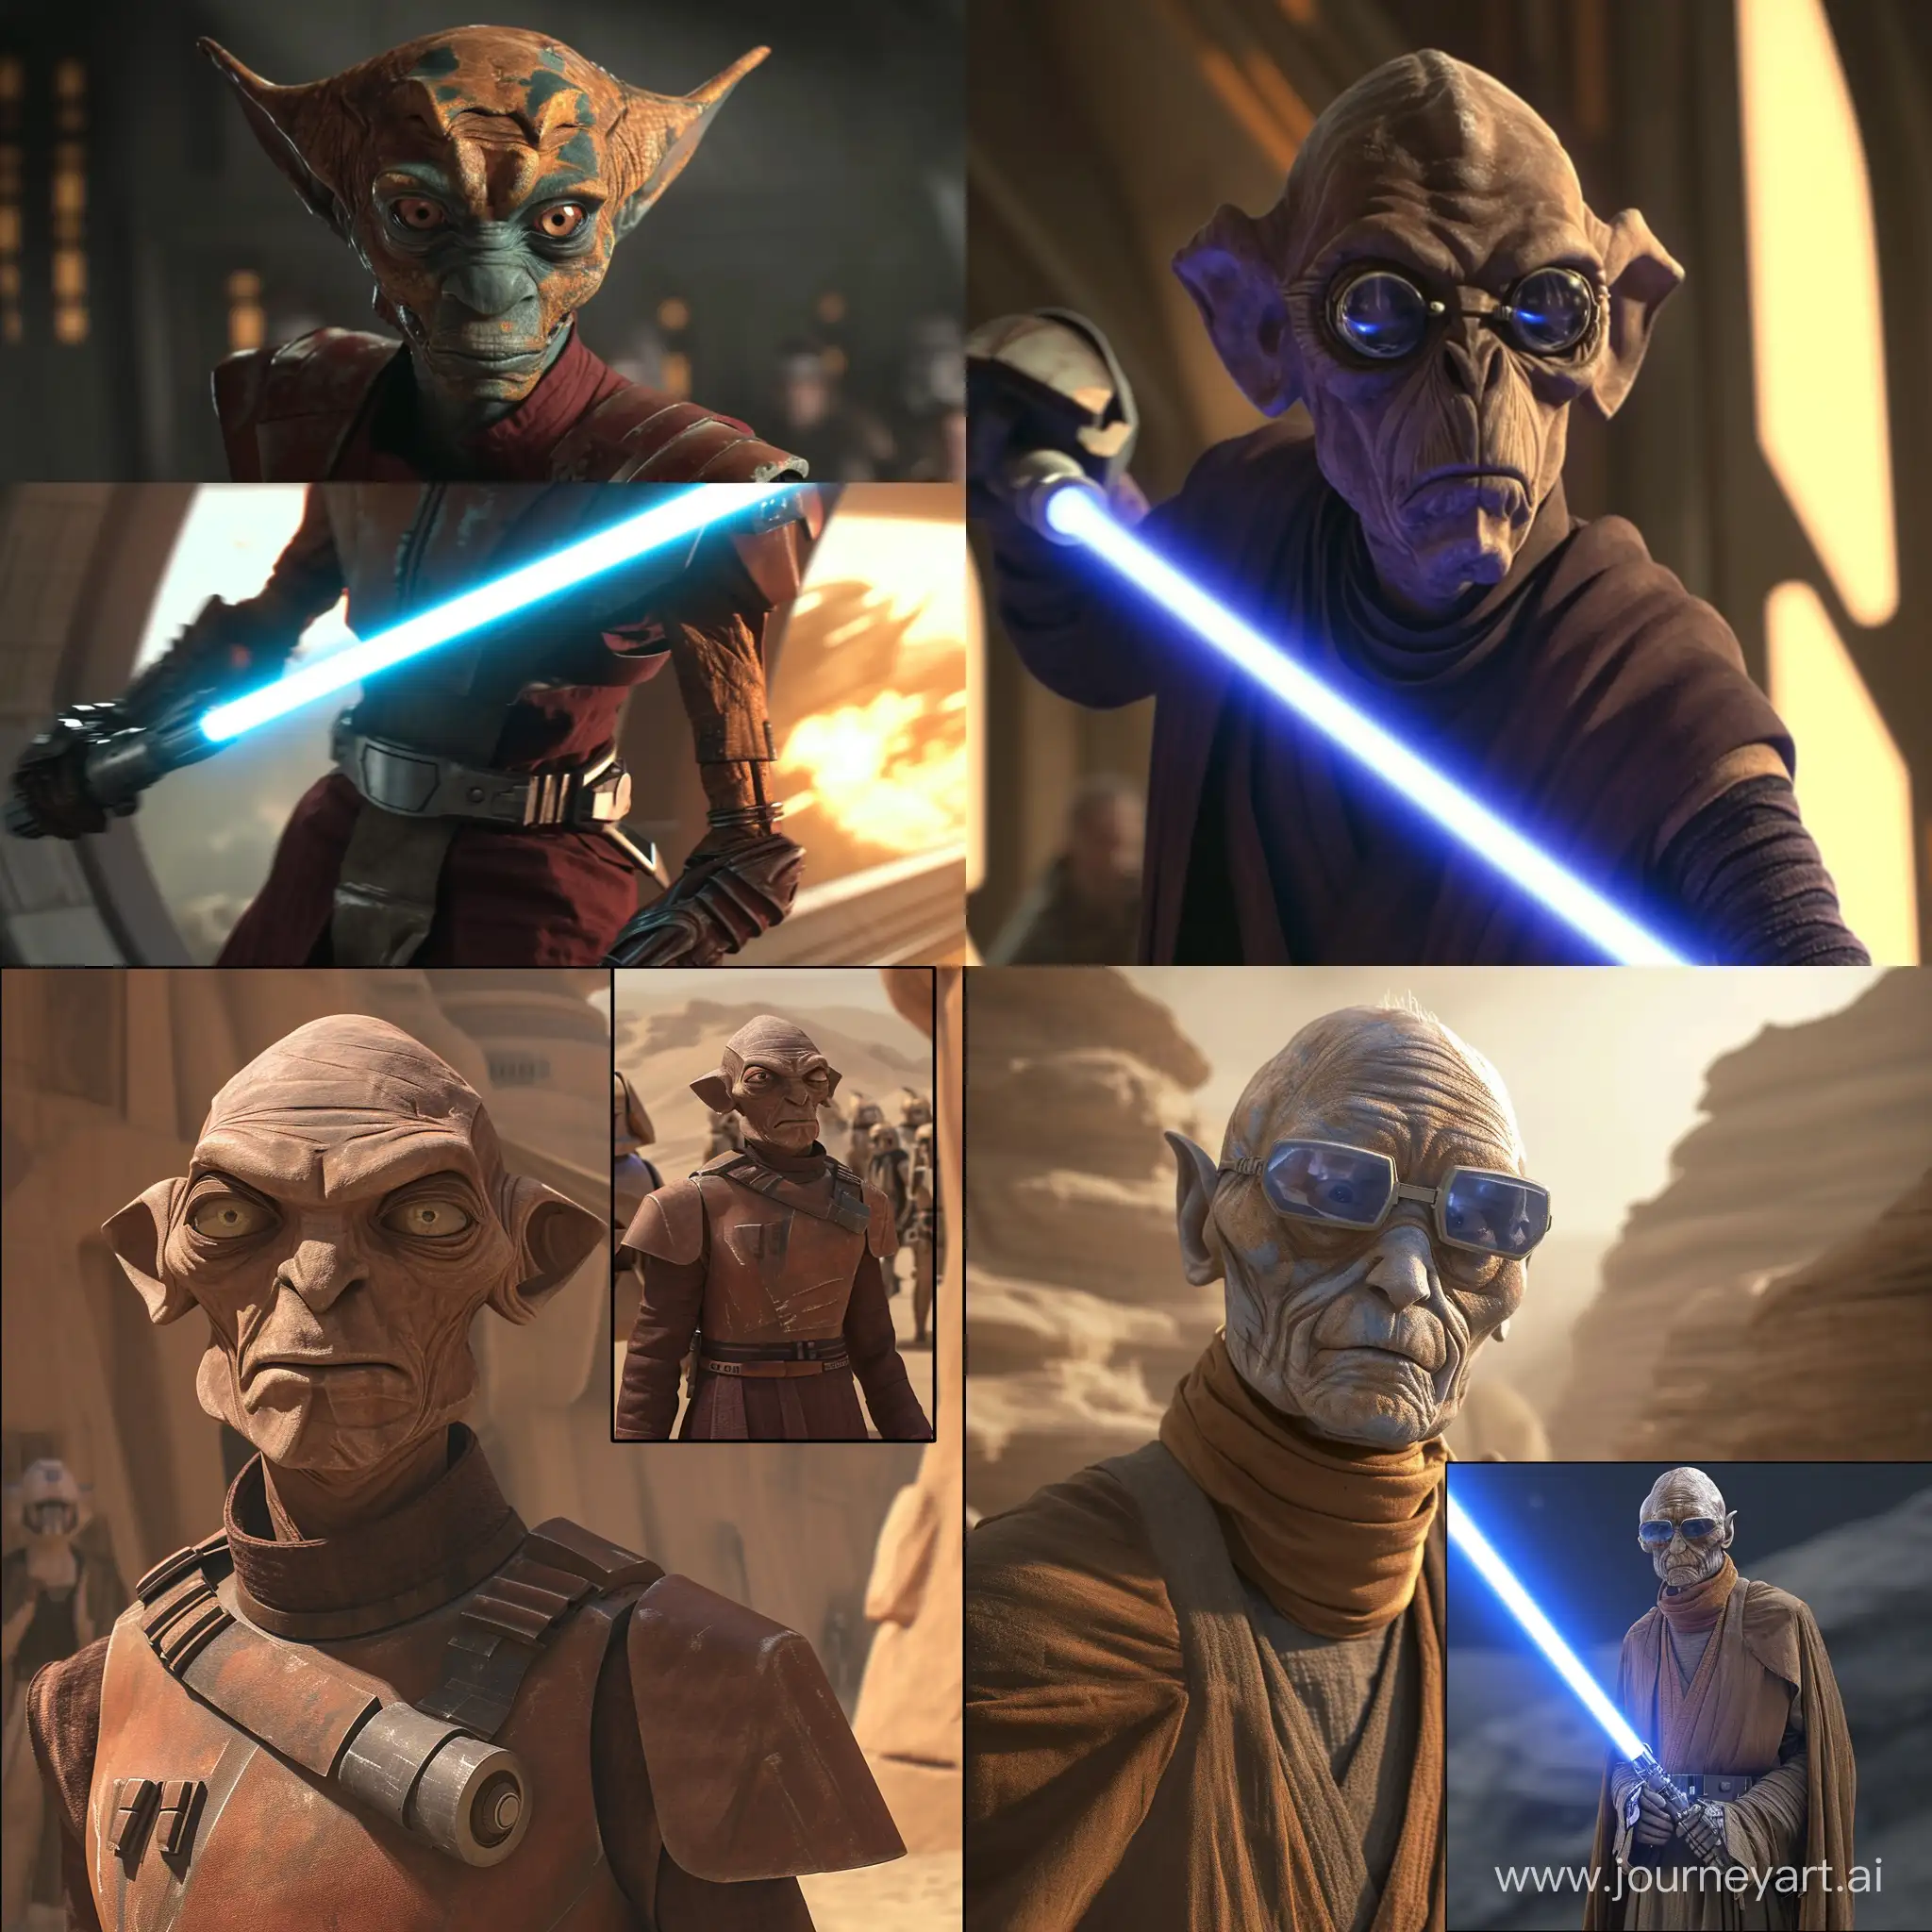 Plo Koon in a live-action Star Wars: The Clone Wars movie